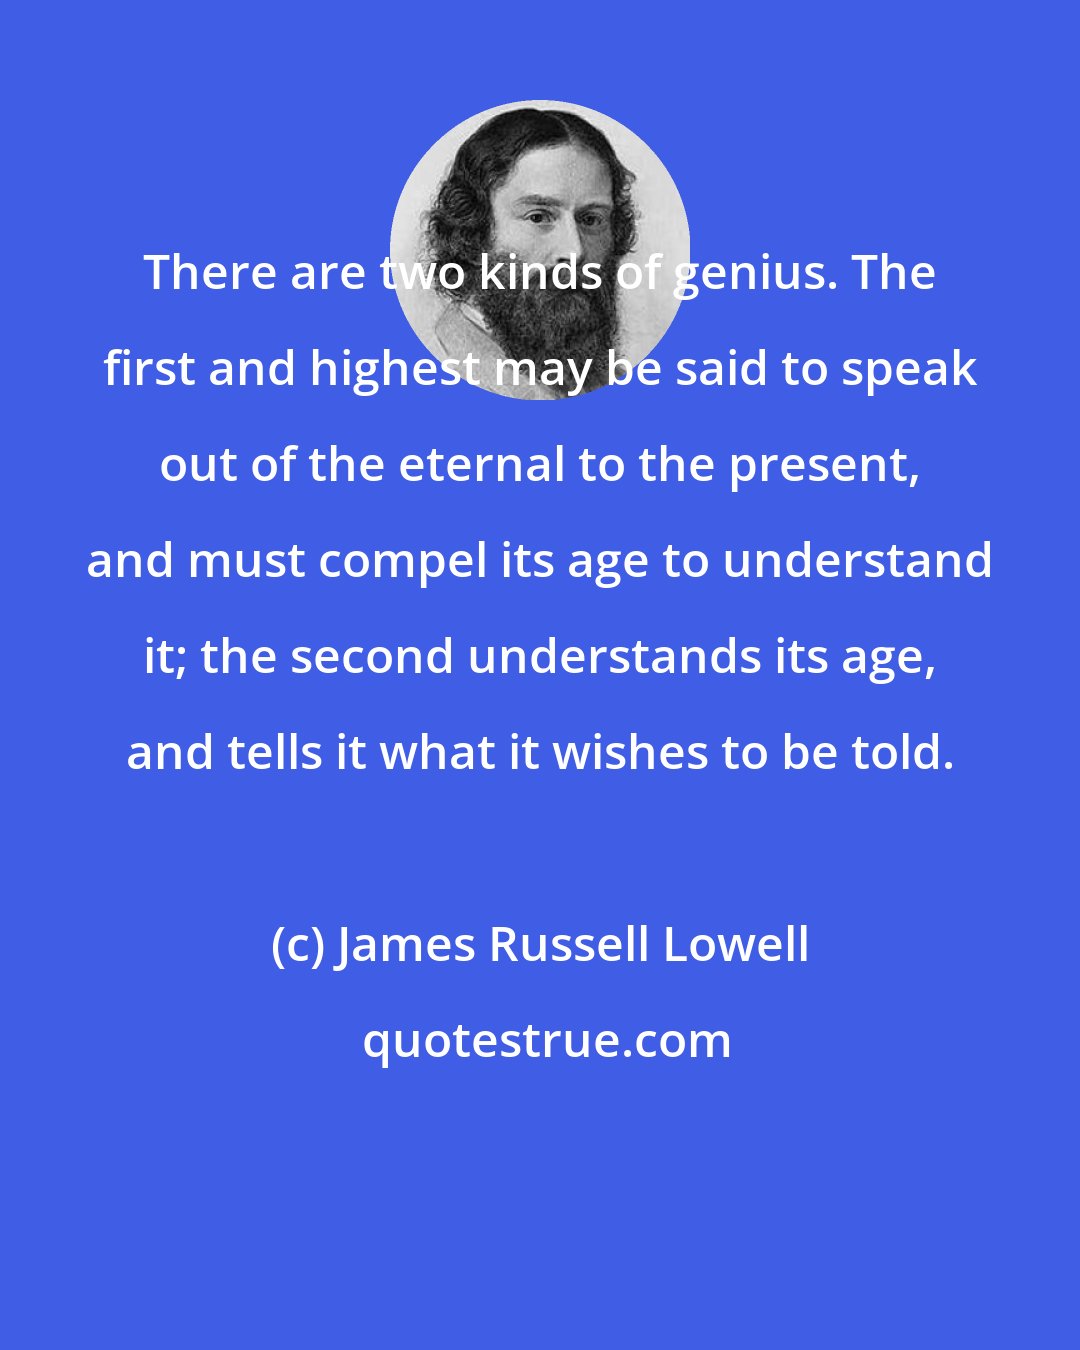 James Russell Lowell: There are two kinds of genius. The first and highest may be said to speak out of the eternal to the present, and must compel its age to understand it; the second understands its age, and tells it what it wishes to be told.